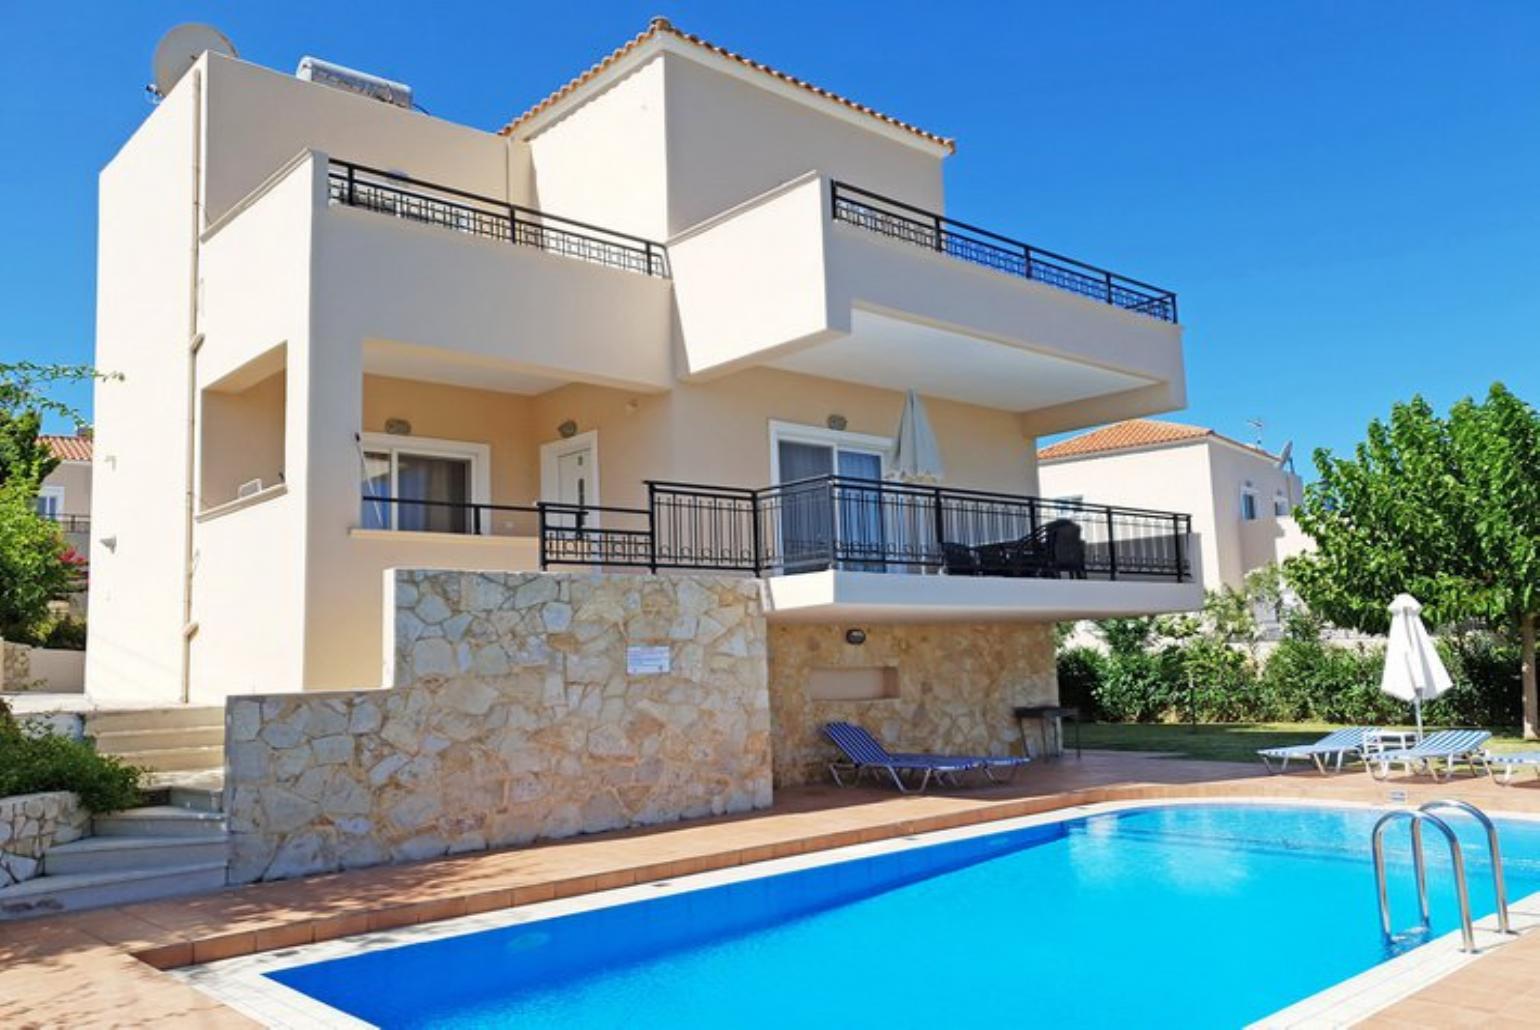 Beautiful villa with private pool, terrace, and lawn